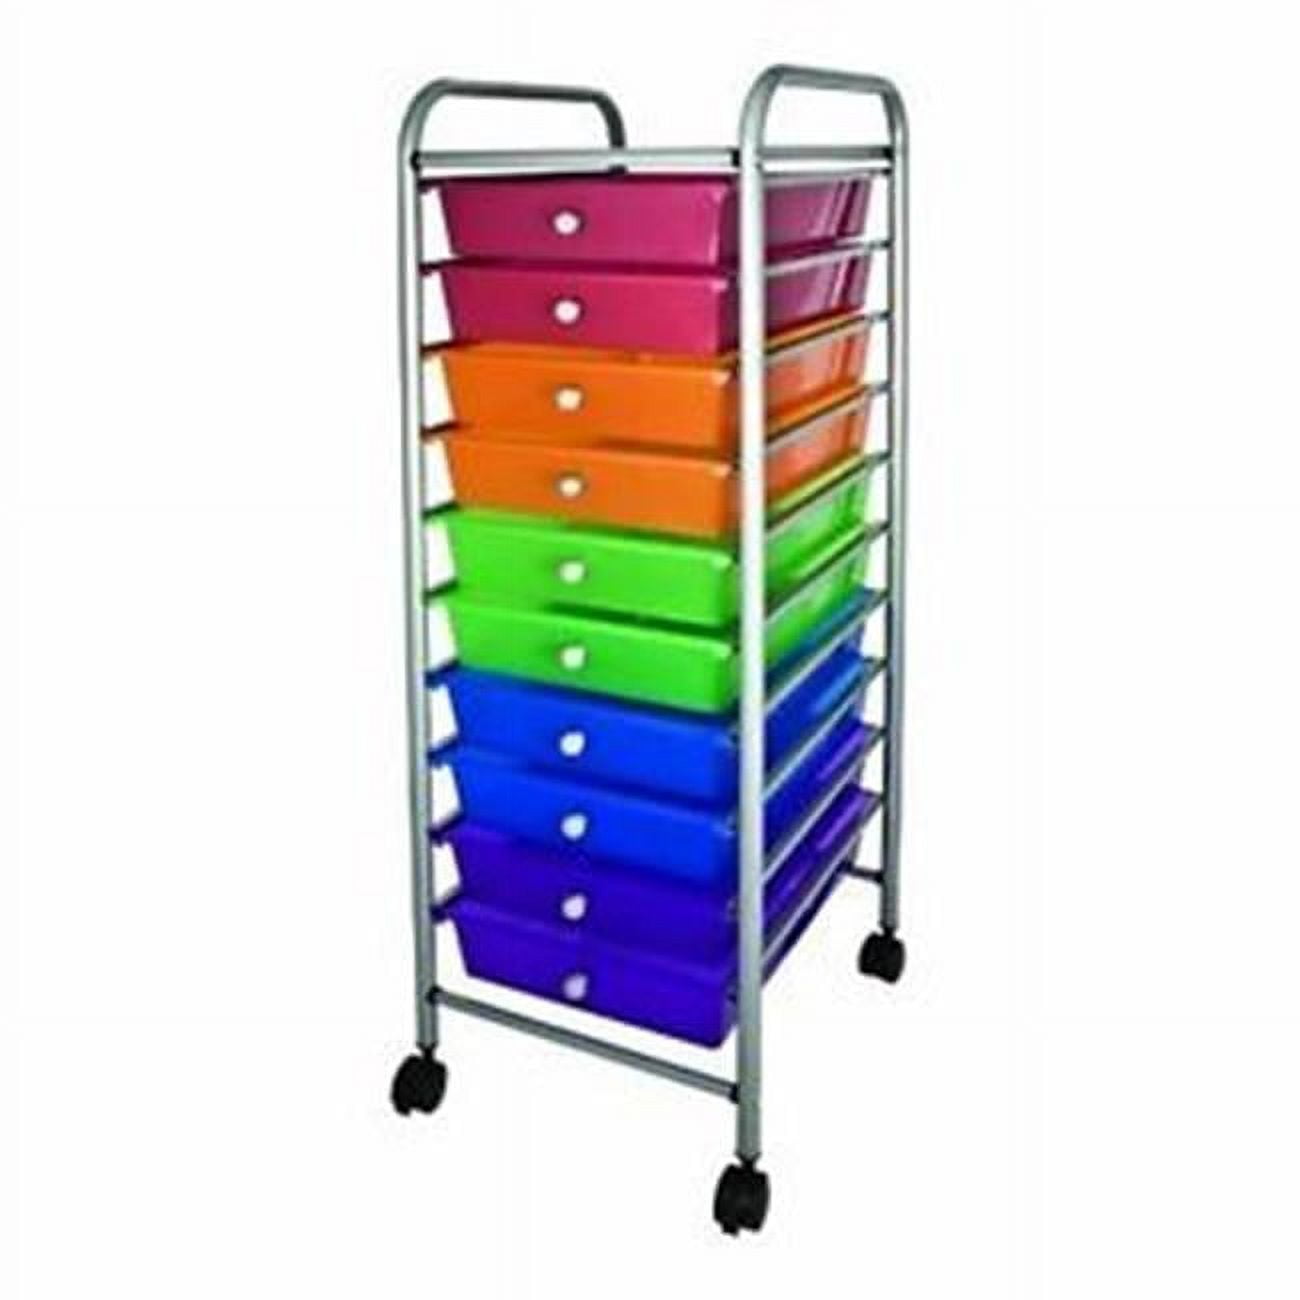 Advantus Corp.- Office 10 Drawer Rolling Organizer - Multi-colored, 37.6 X 13 X 15.4 In.